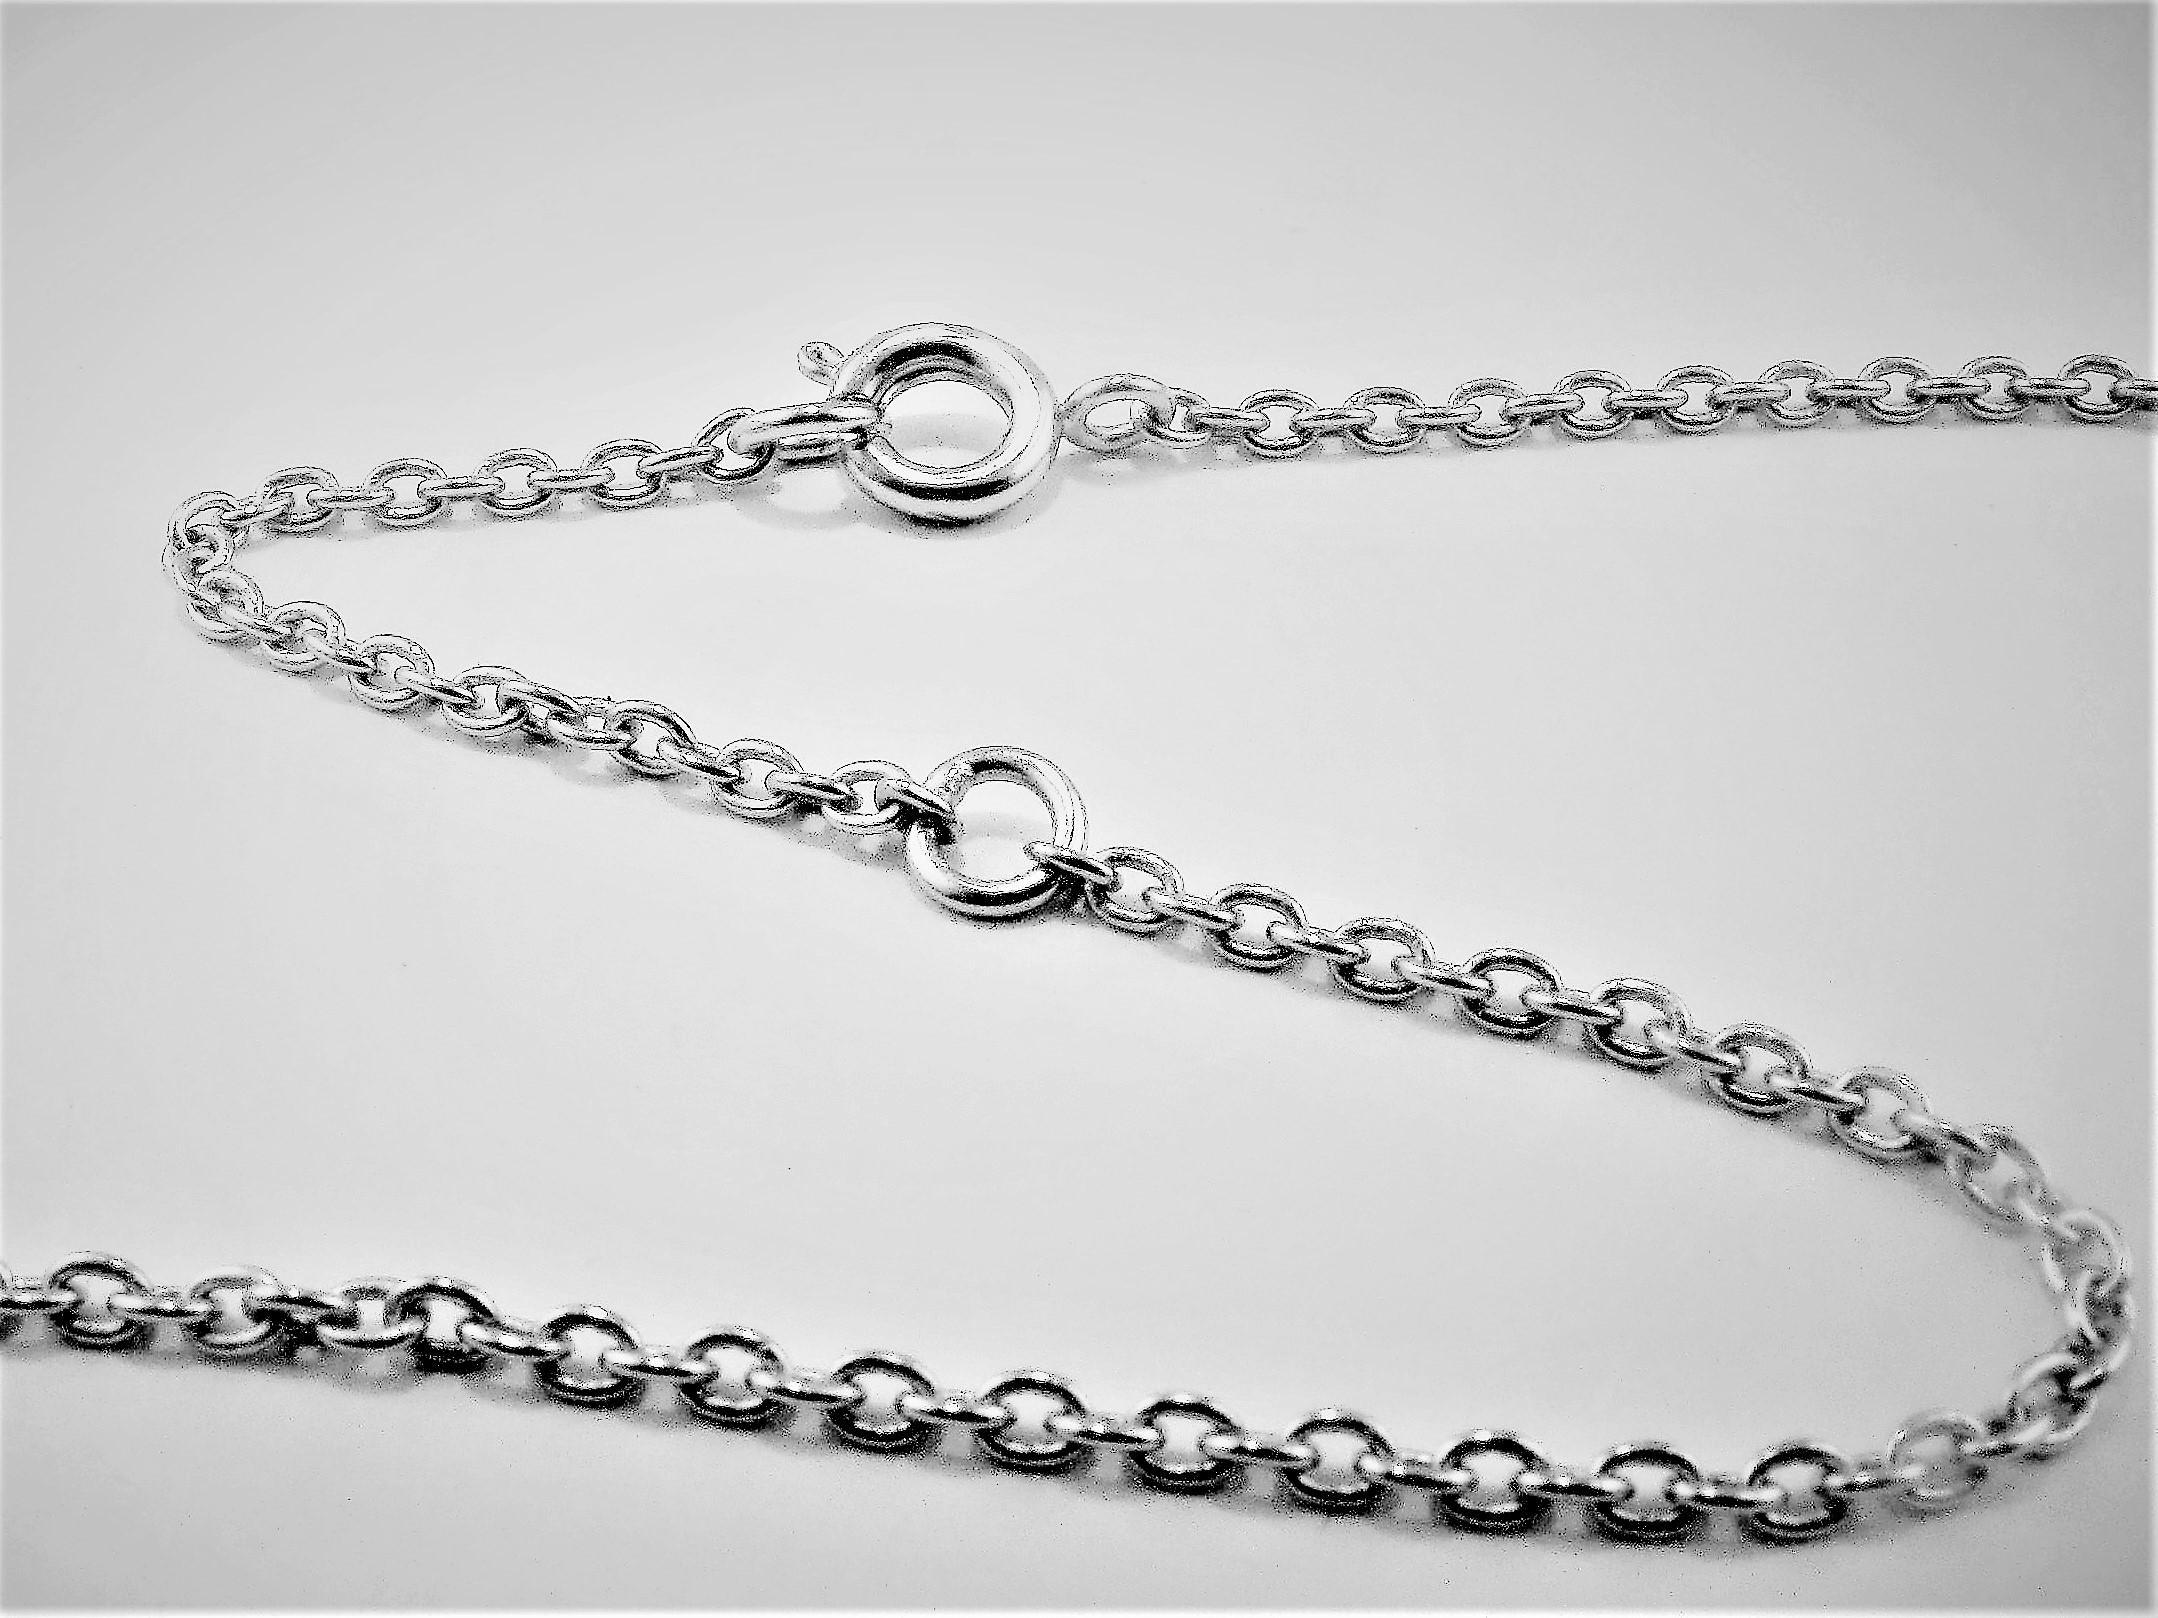 Inspired by his researches on diamonds and by flying giant diamonds in the sky Denis Bellessort creates DIAMONDS in the SKY pieces.
Handmade.
Ttrace chain 16.5 inches with length reduction link.
Signed BELLESSORT BONDS OF UNION
Sterling silver white